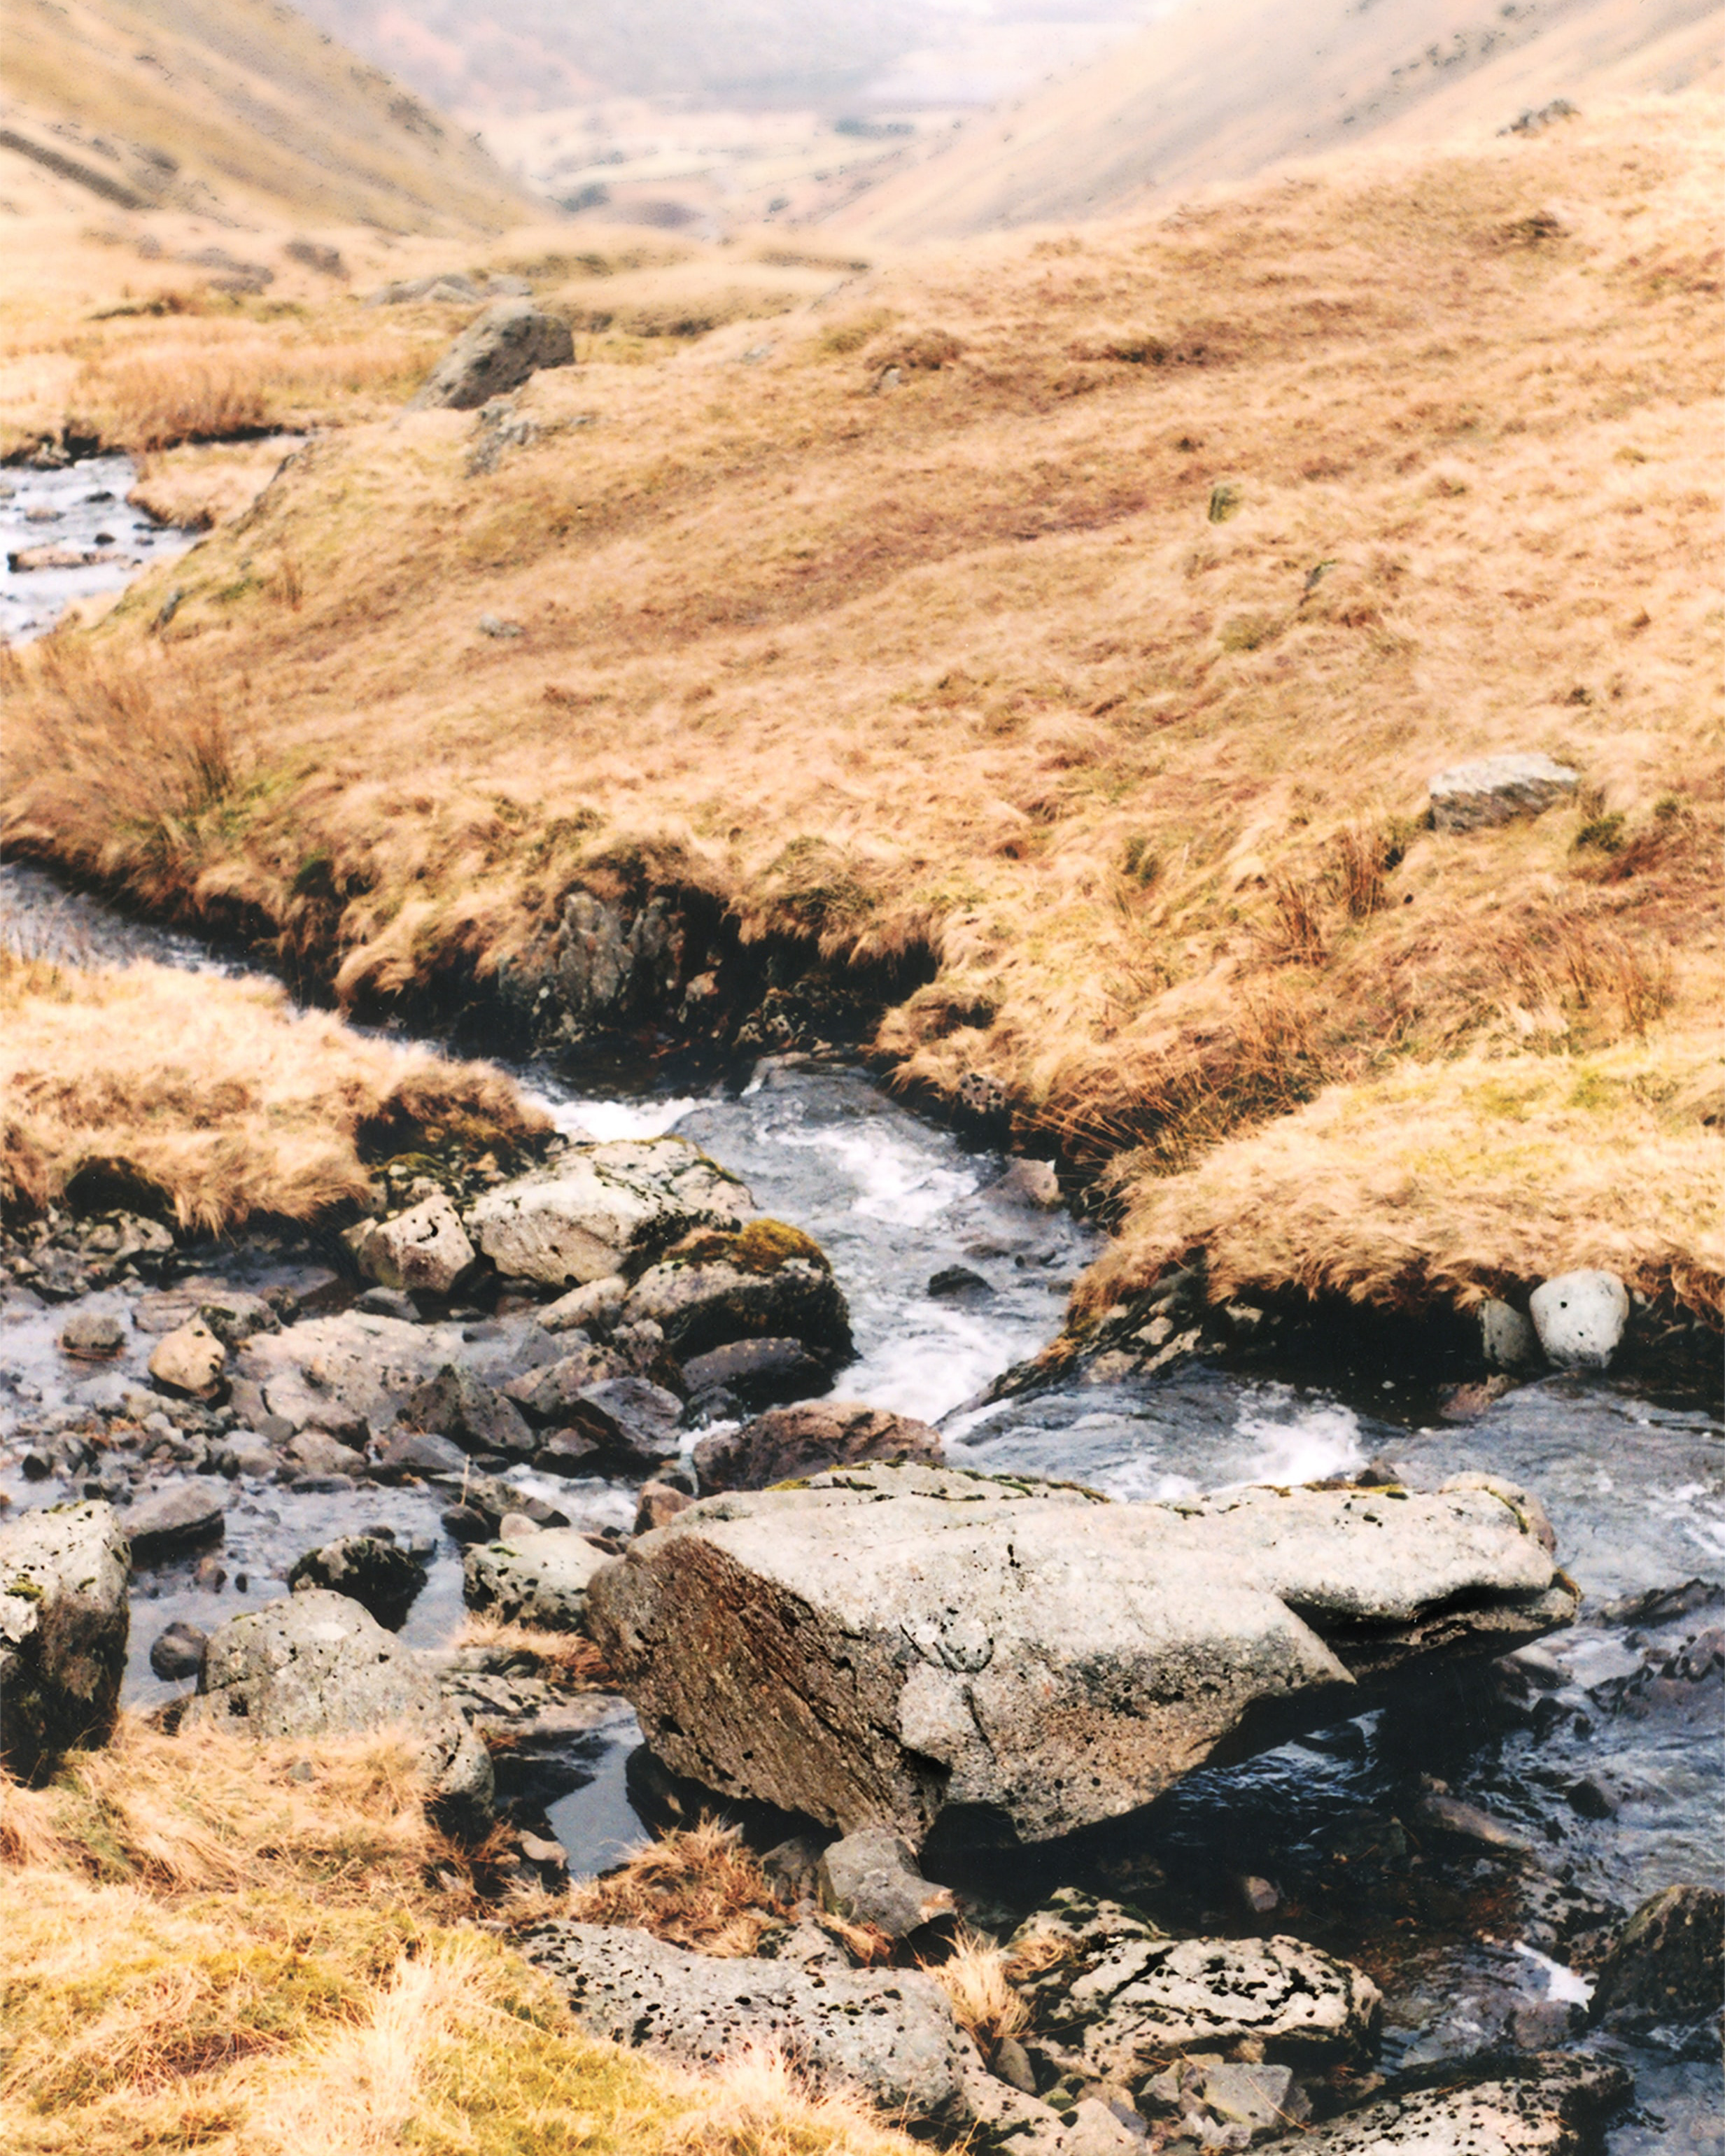 River in the Esk Valley